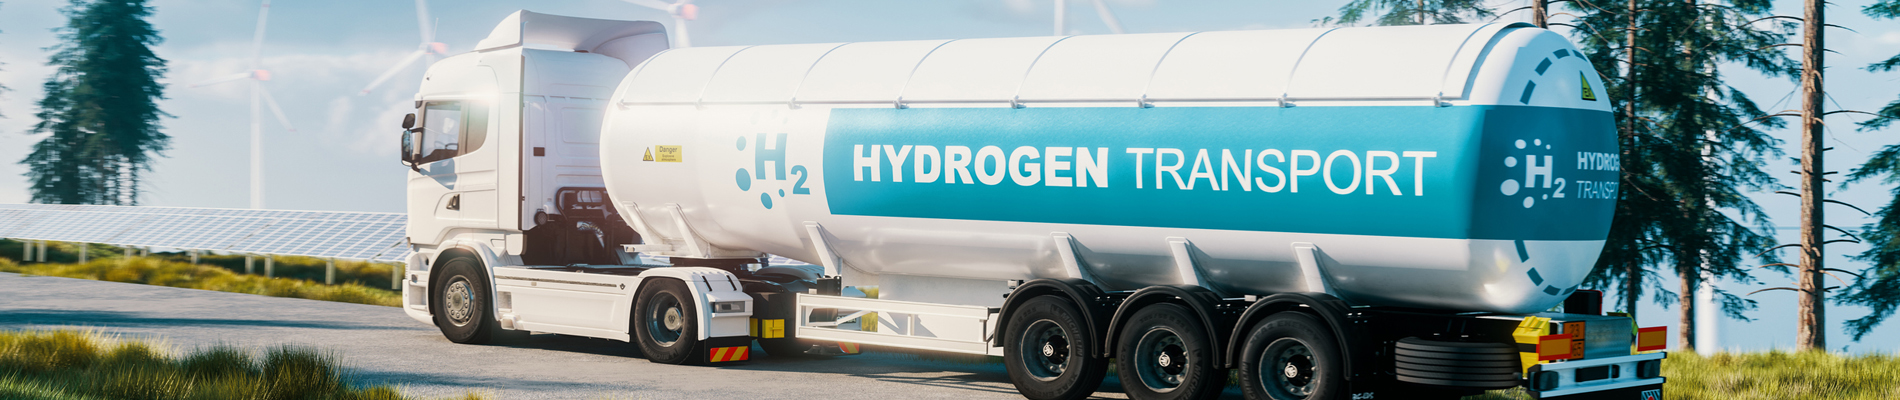 Green hydrogen systems campaign image 